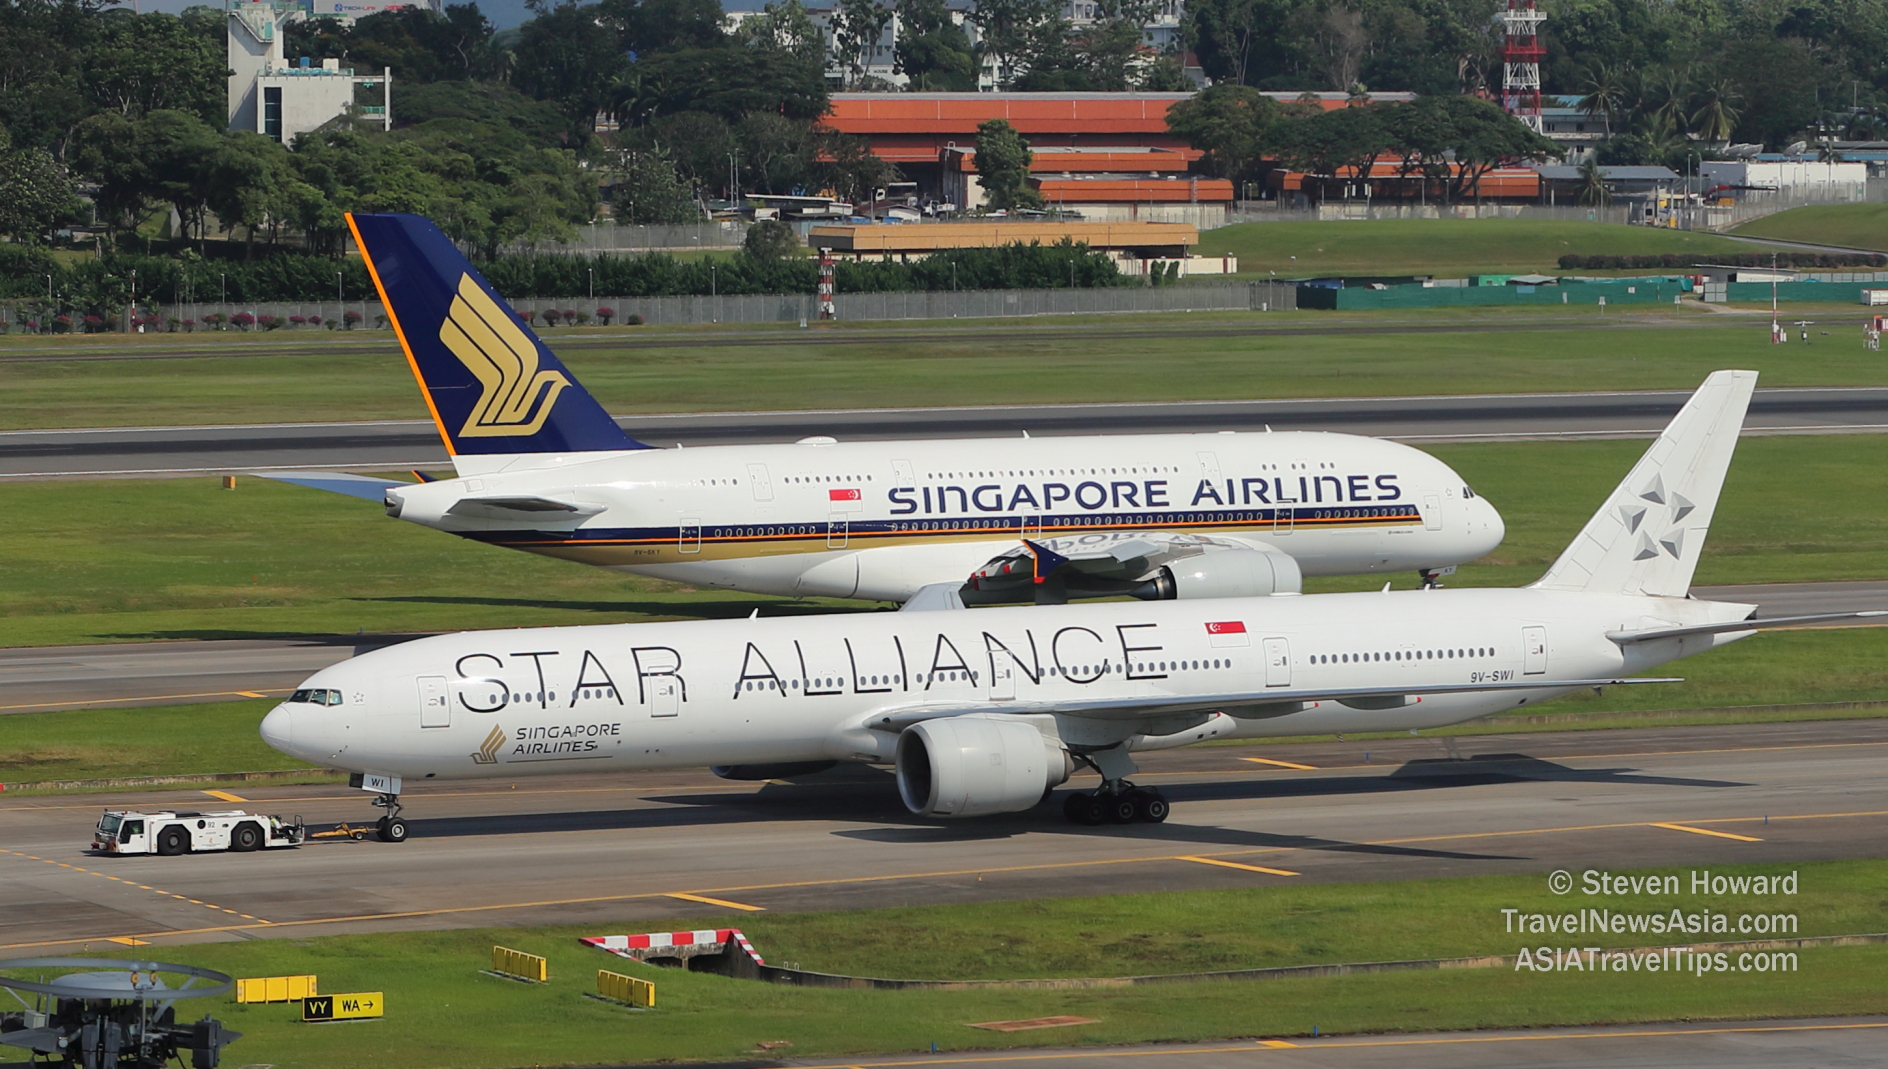 Singapore Airlines A380 and B777 at SIN. Picture by Steven Howard of TravelNewsAsia.com Click to enlarge.